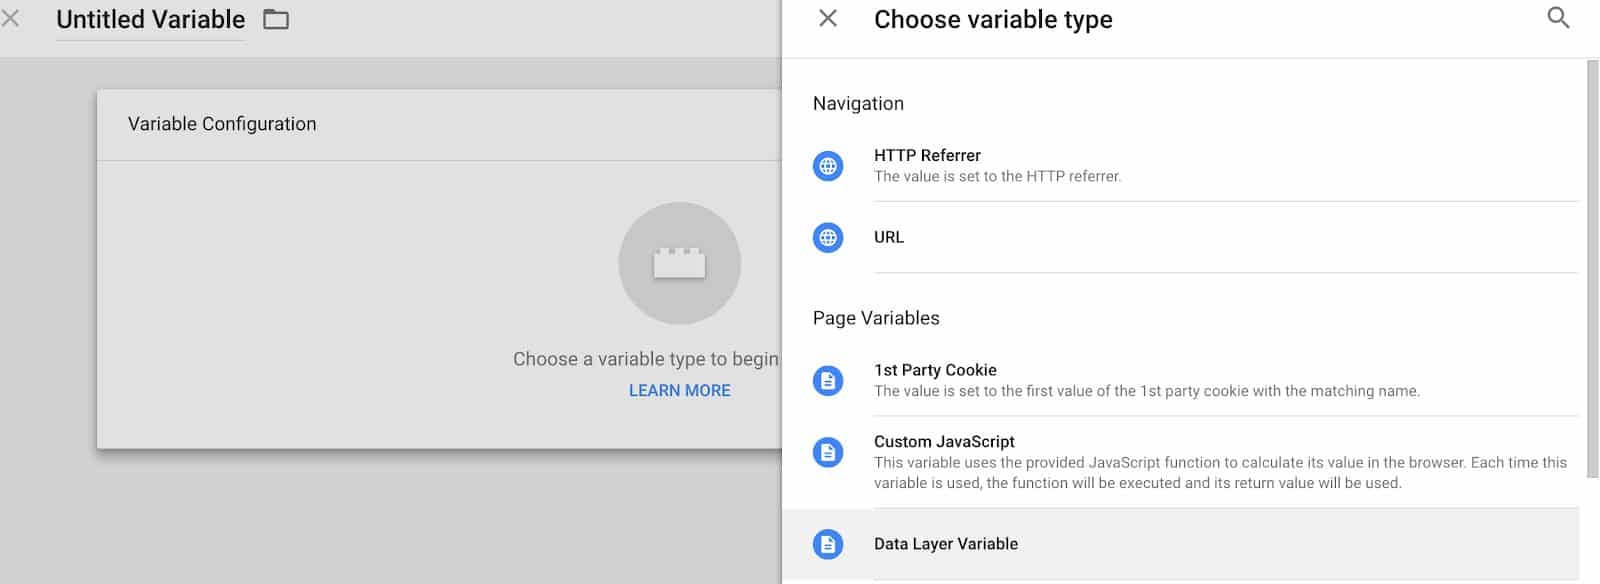 Data Layer Variable in Google Tag Manager